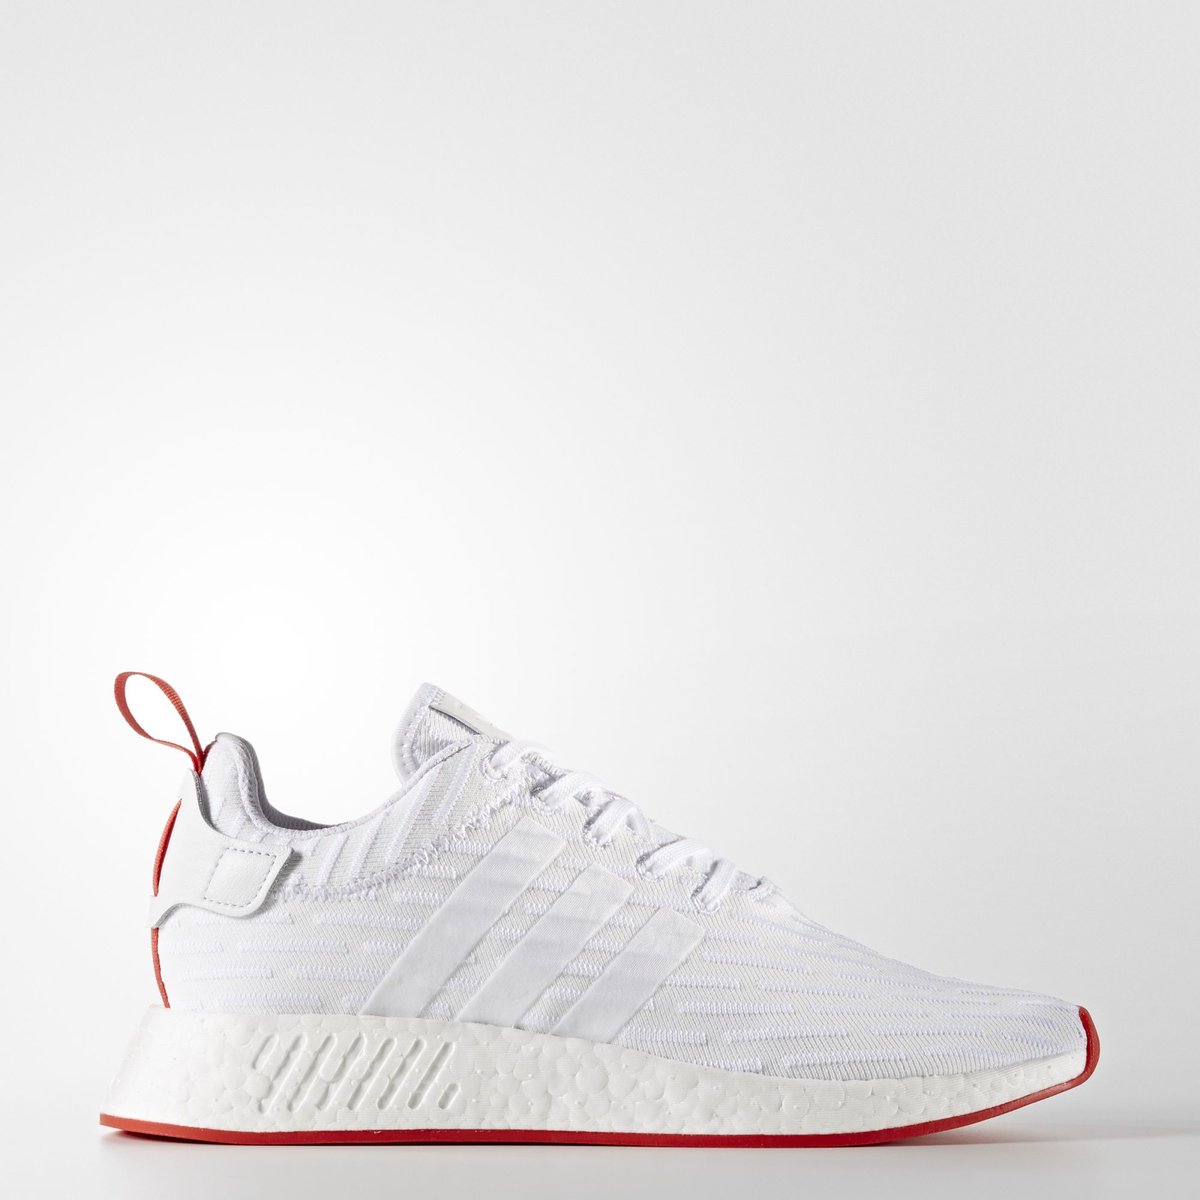 adidas-nmd_r2-pk-white-core-red-2